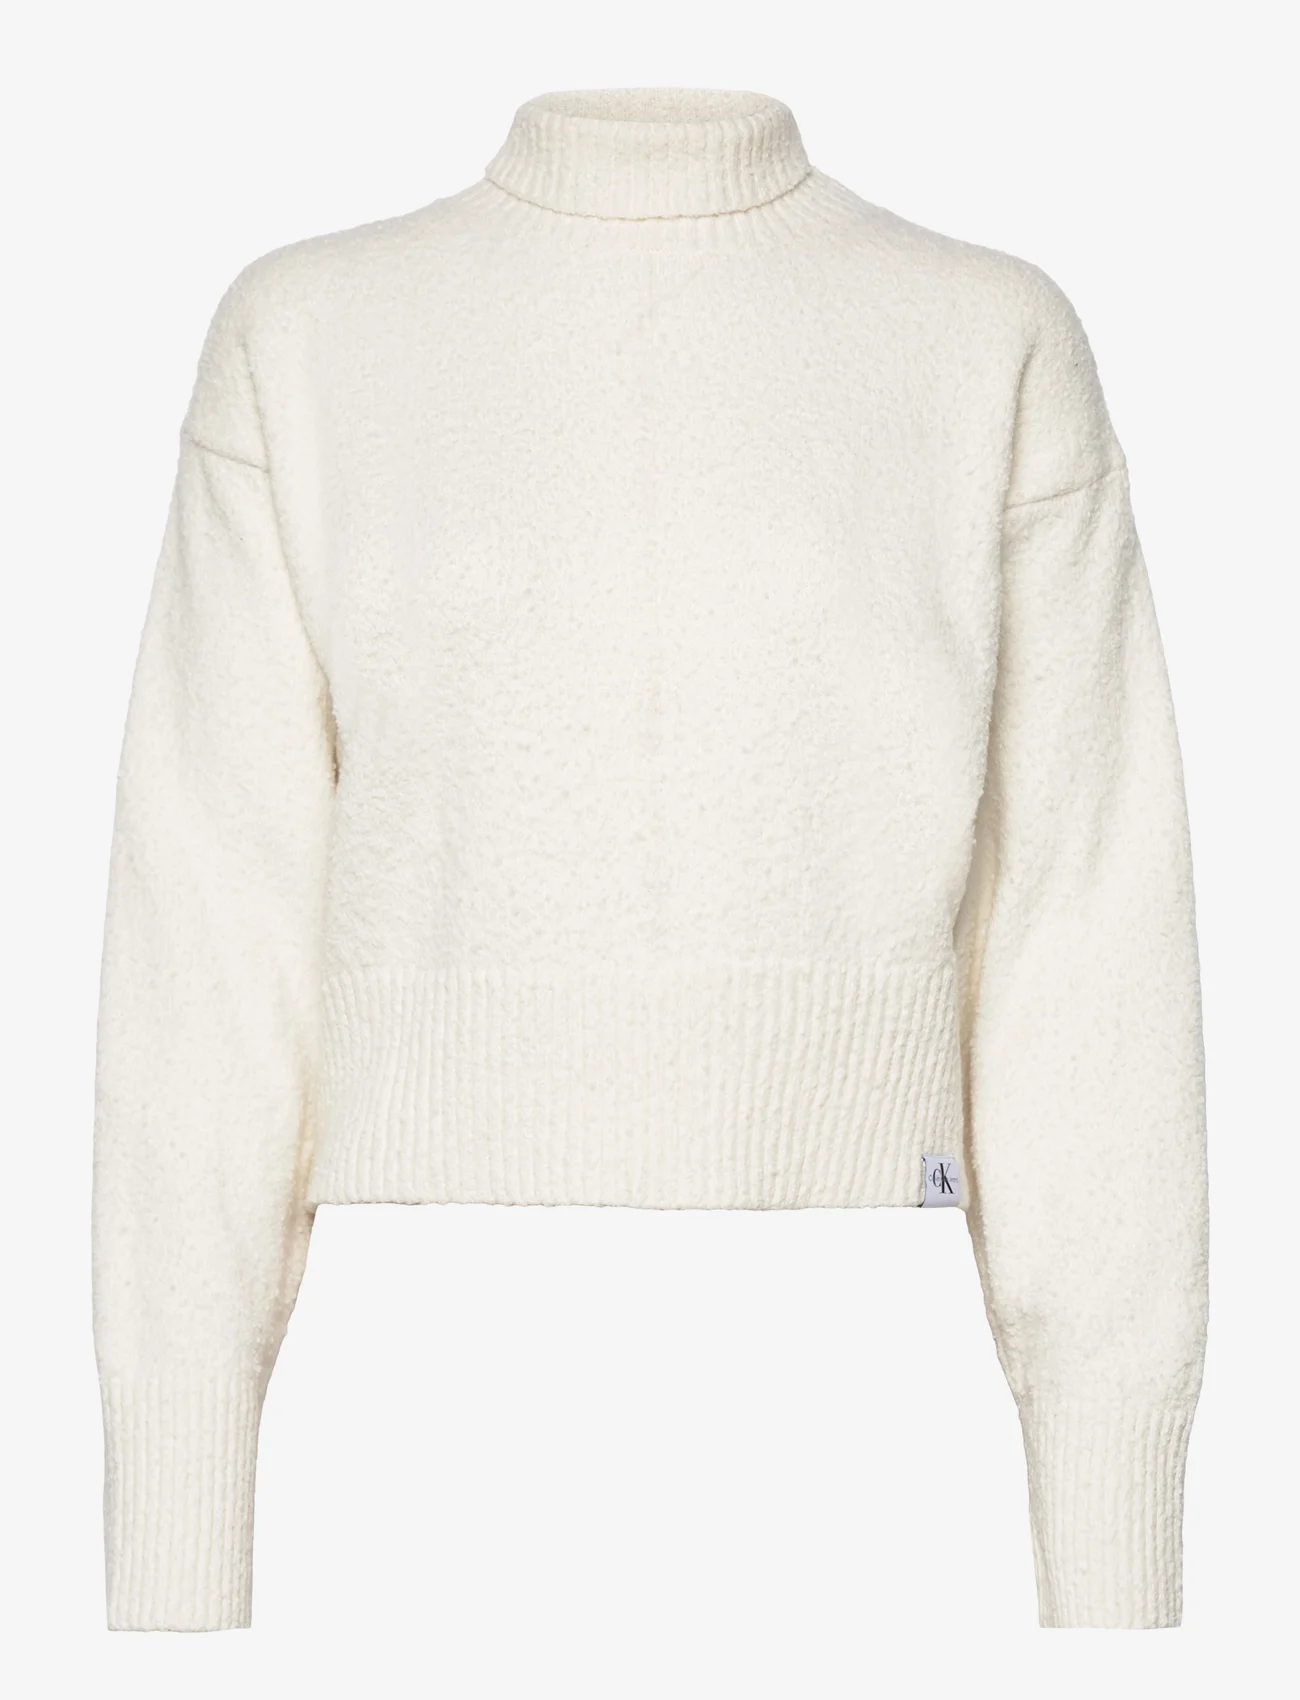 Calvin Klein Jeans - BOUCLE HIGH NECK SWEATER - truien - ivory - 0